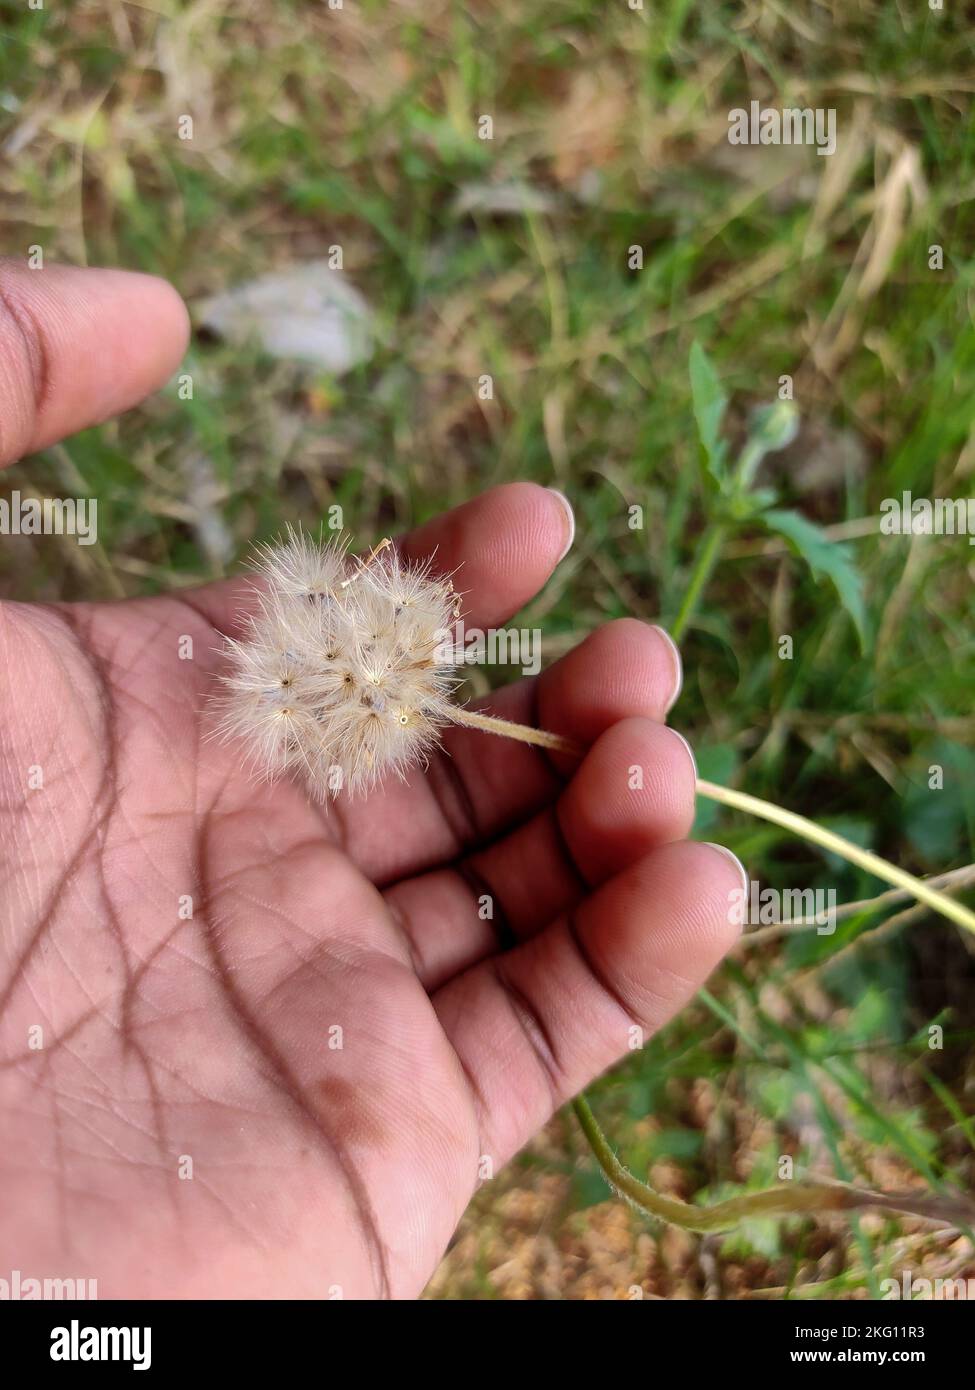 Tridax Daisy (Tridax procumbens) - Mature fruit containing winged seeds, poised for wind dispersal, held in a hand. Stock Photo